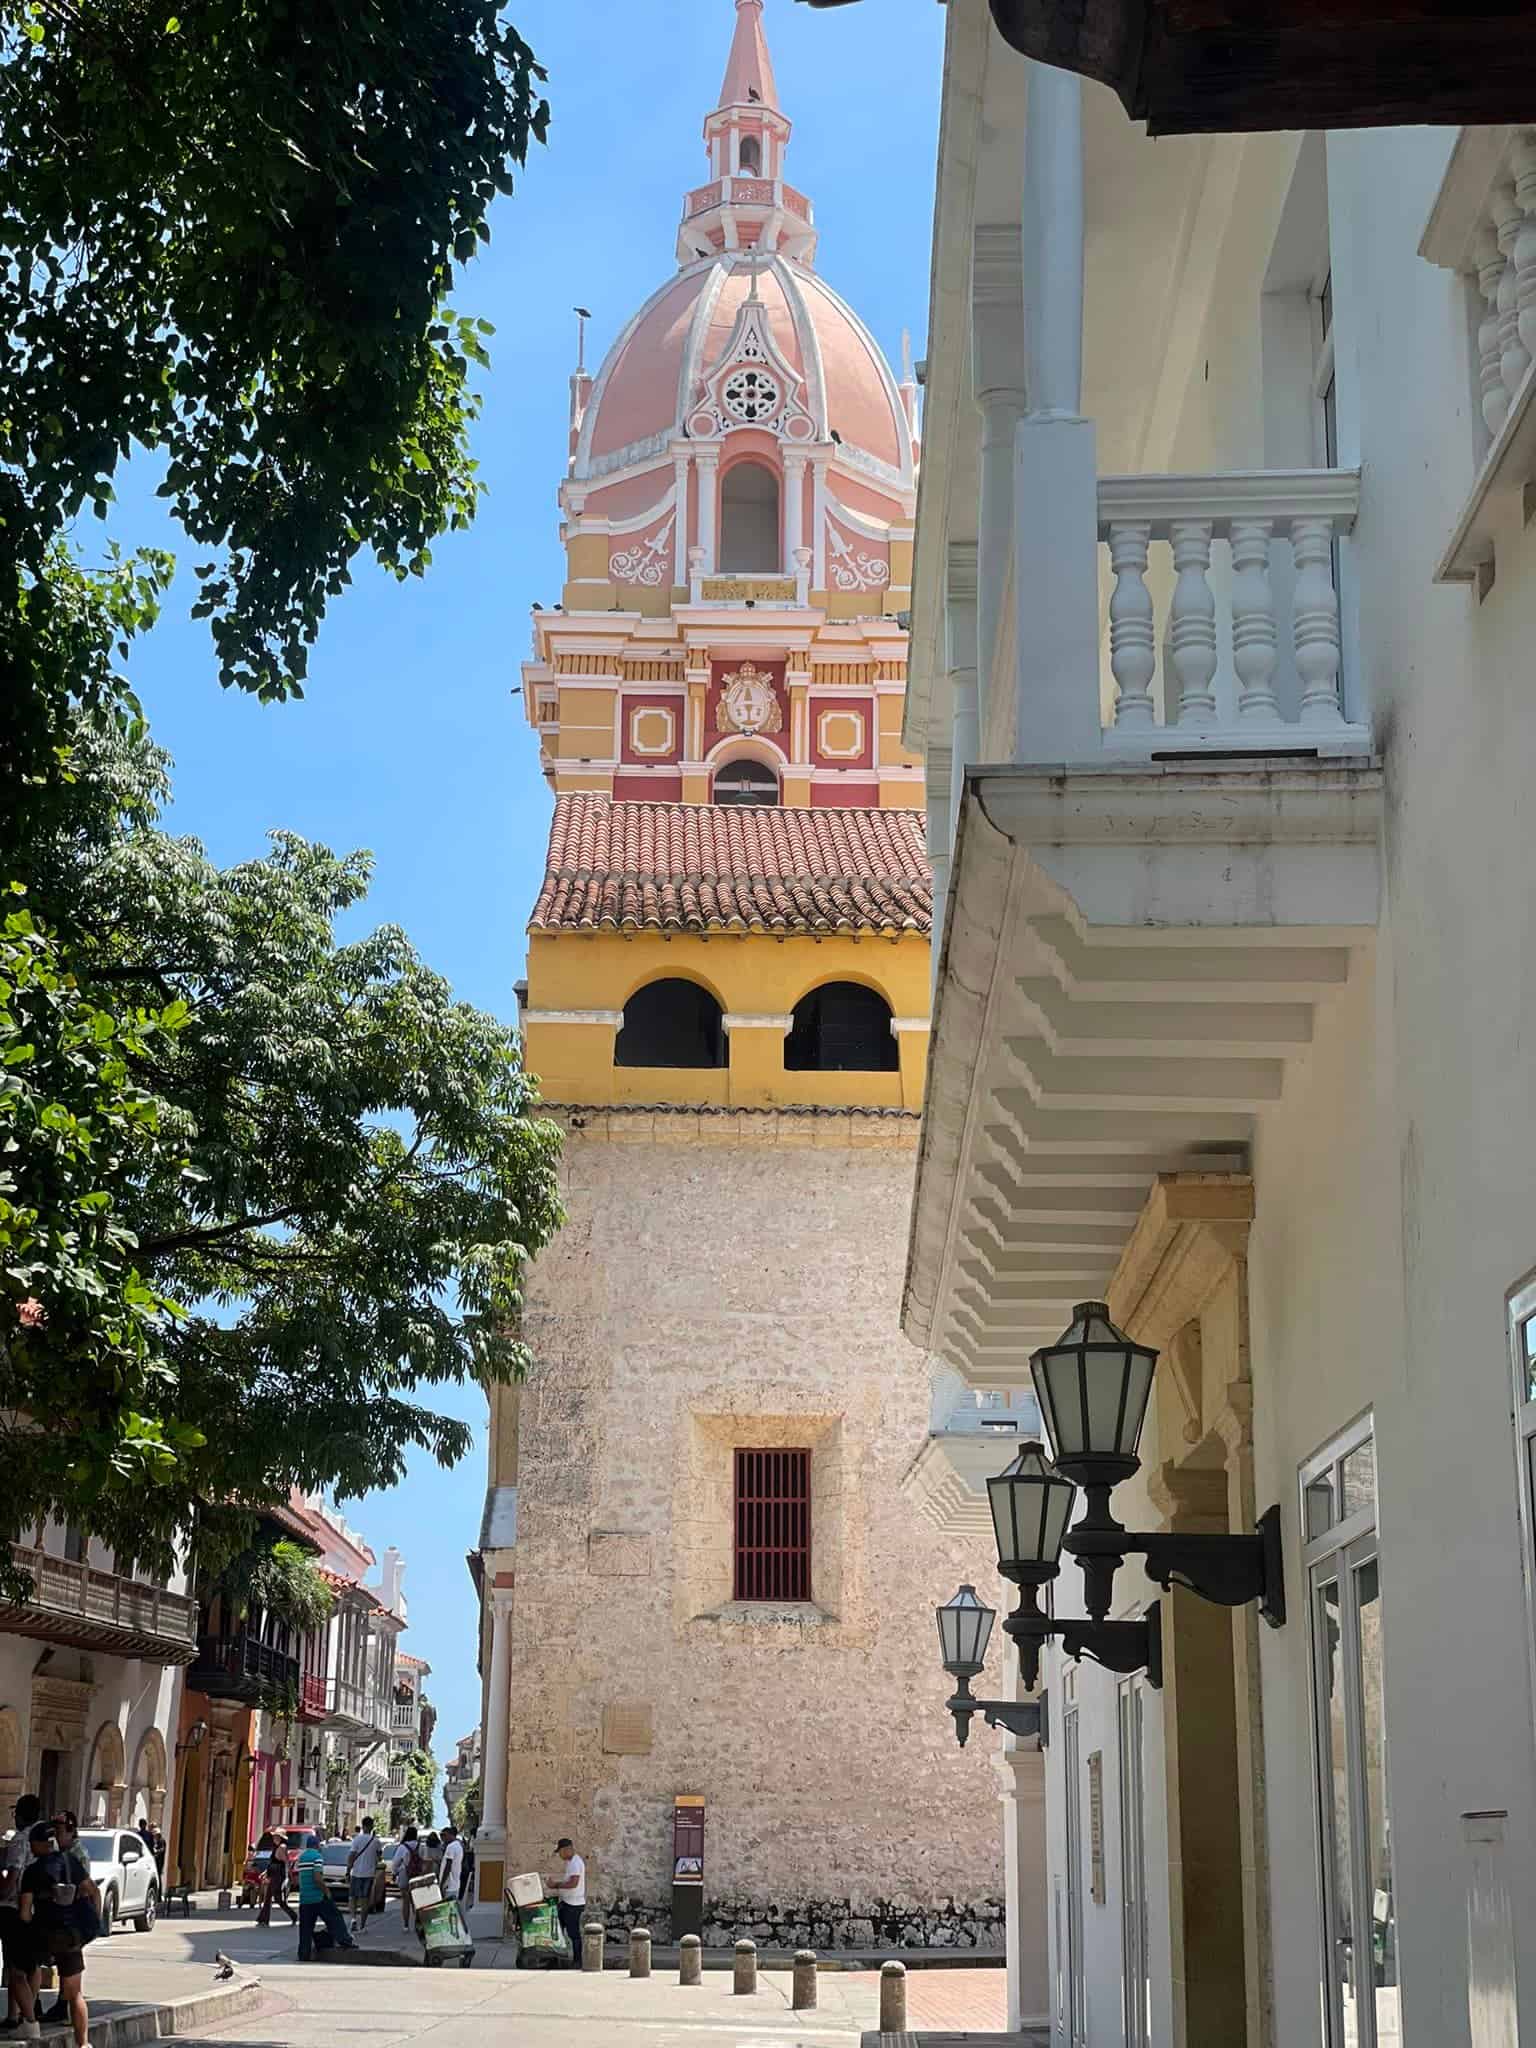 Is Cartagena Colombia safe?